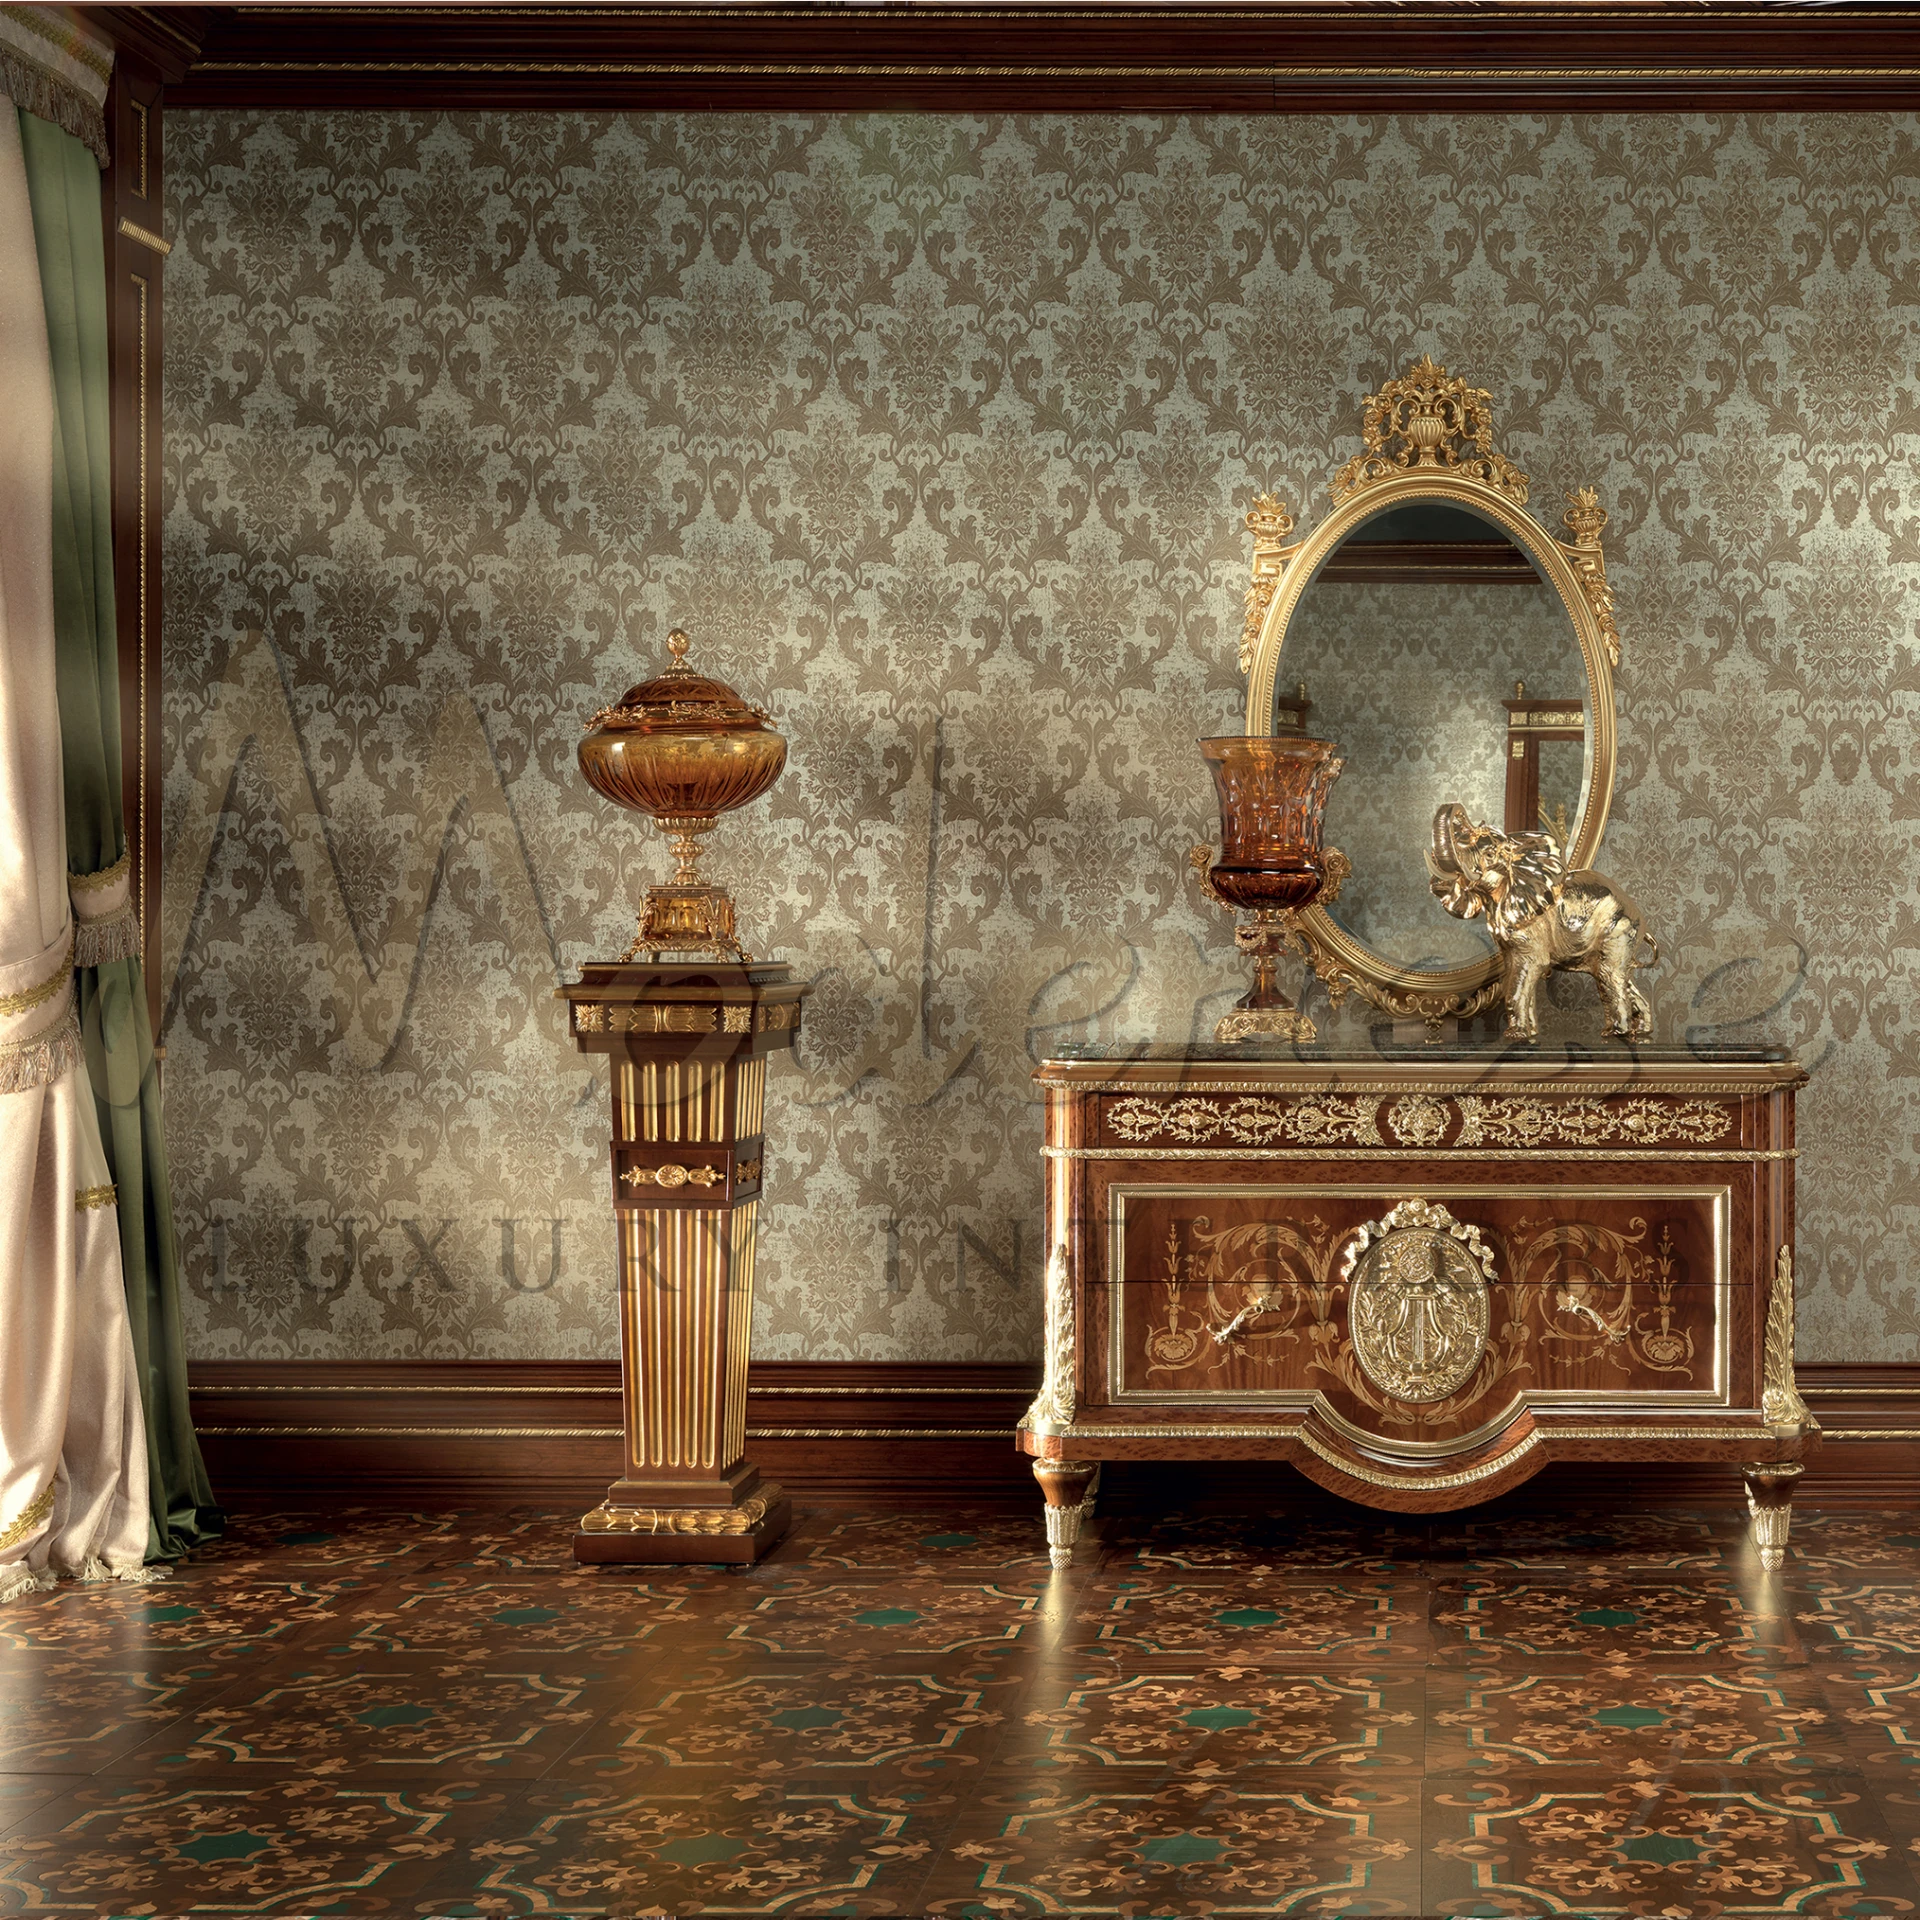 A room looks very classic and luxurious with detailed solid wood sideboard and a vase.